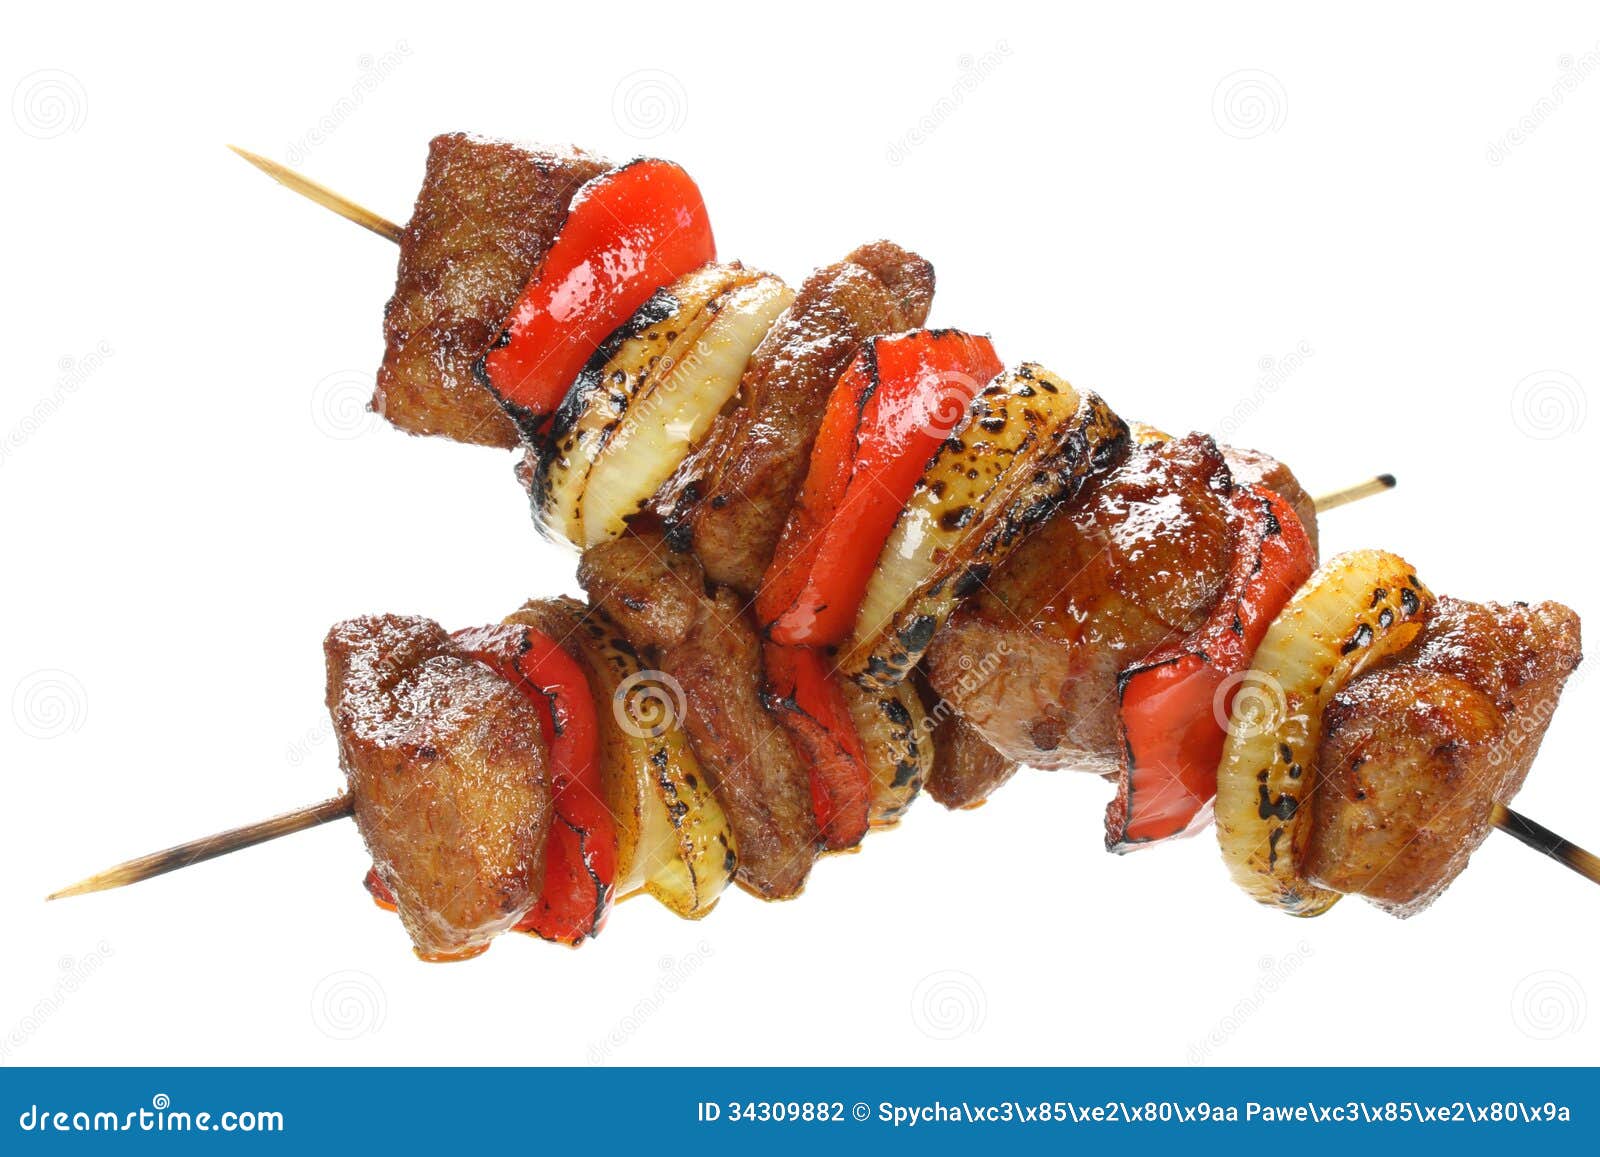 Skewers Made With Pork Stock Photography - Image: 34309882